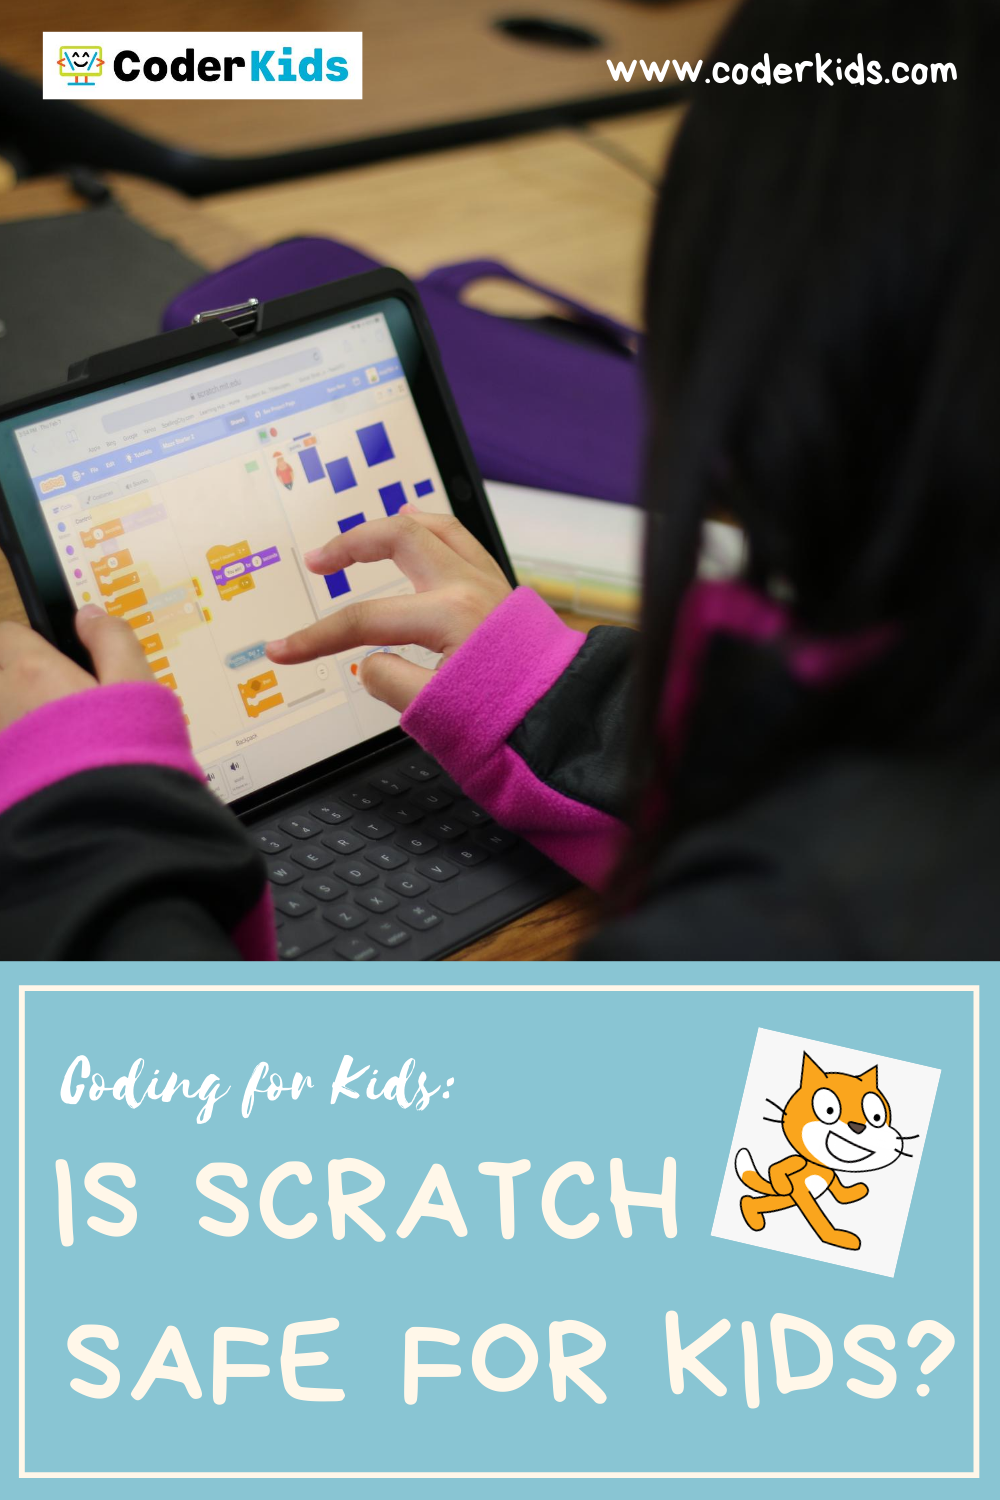 Is Scratch Safe for Kids?